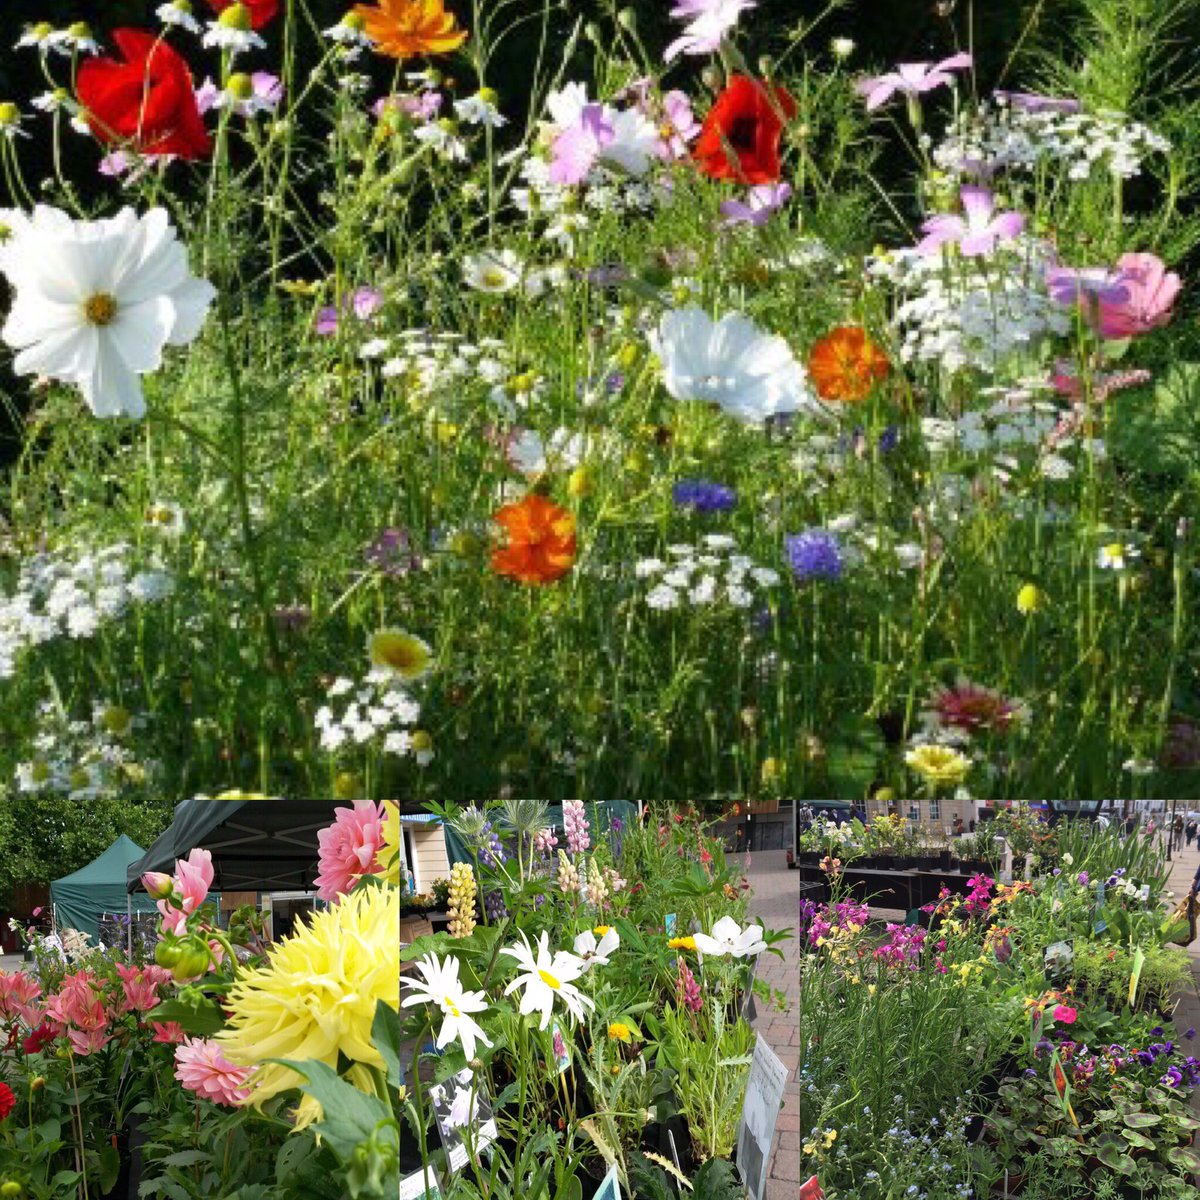 It's not too late to plant out annuals and perennials for late summer colour and loveliness in your garden. Visit the @AndoverGarden18 this Sunday and fill those gaps! #gardening #perennial #annual #Andover #plantsale #latesummercolour #loveandover